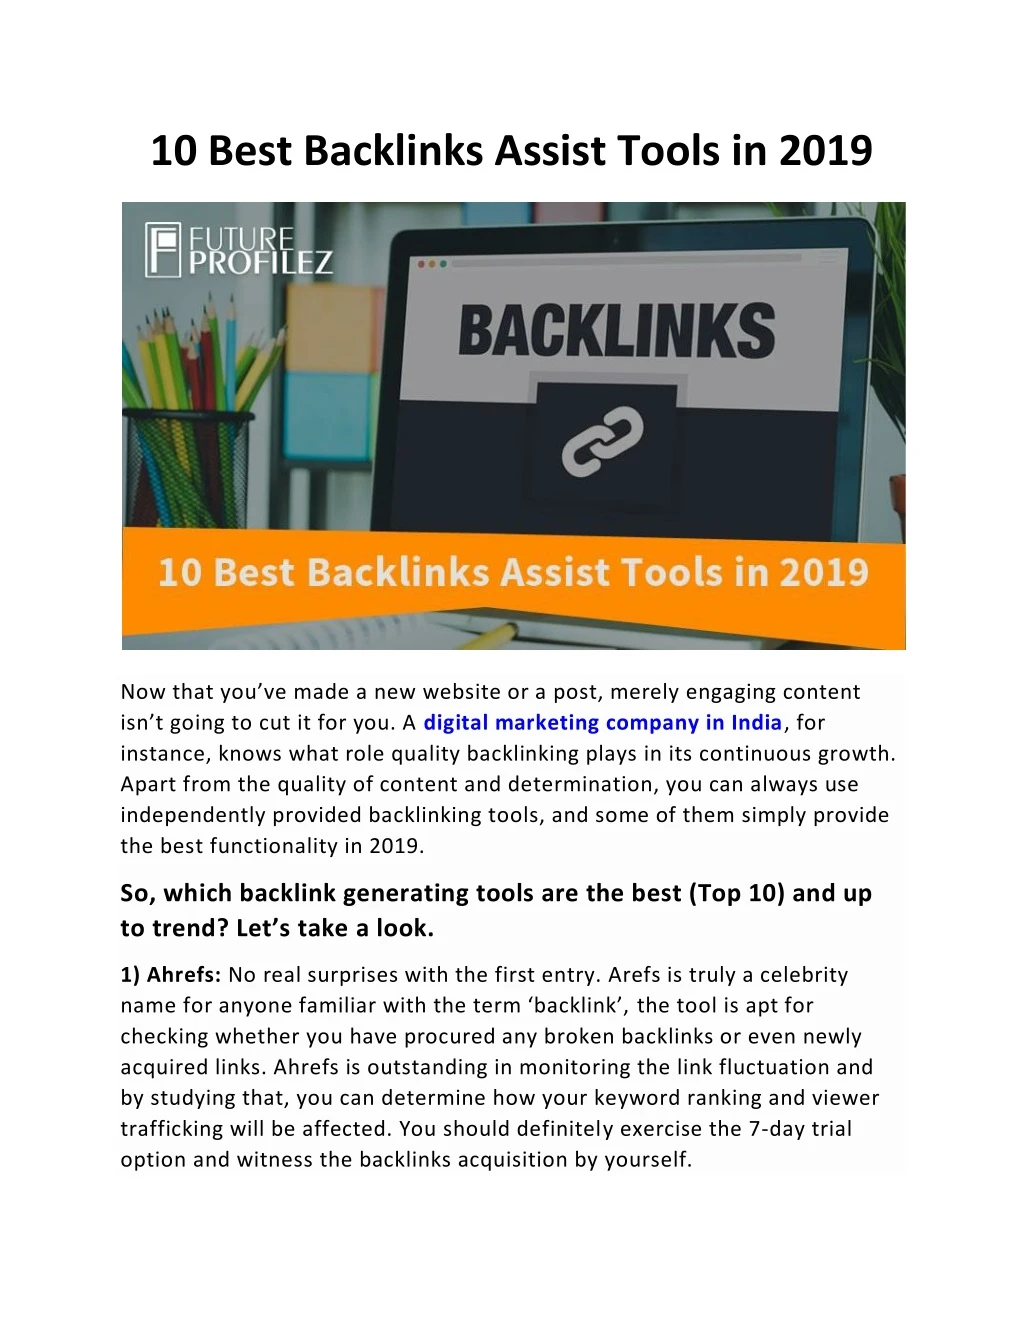 10 best backlinks assist tools in 2019